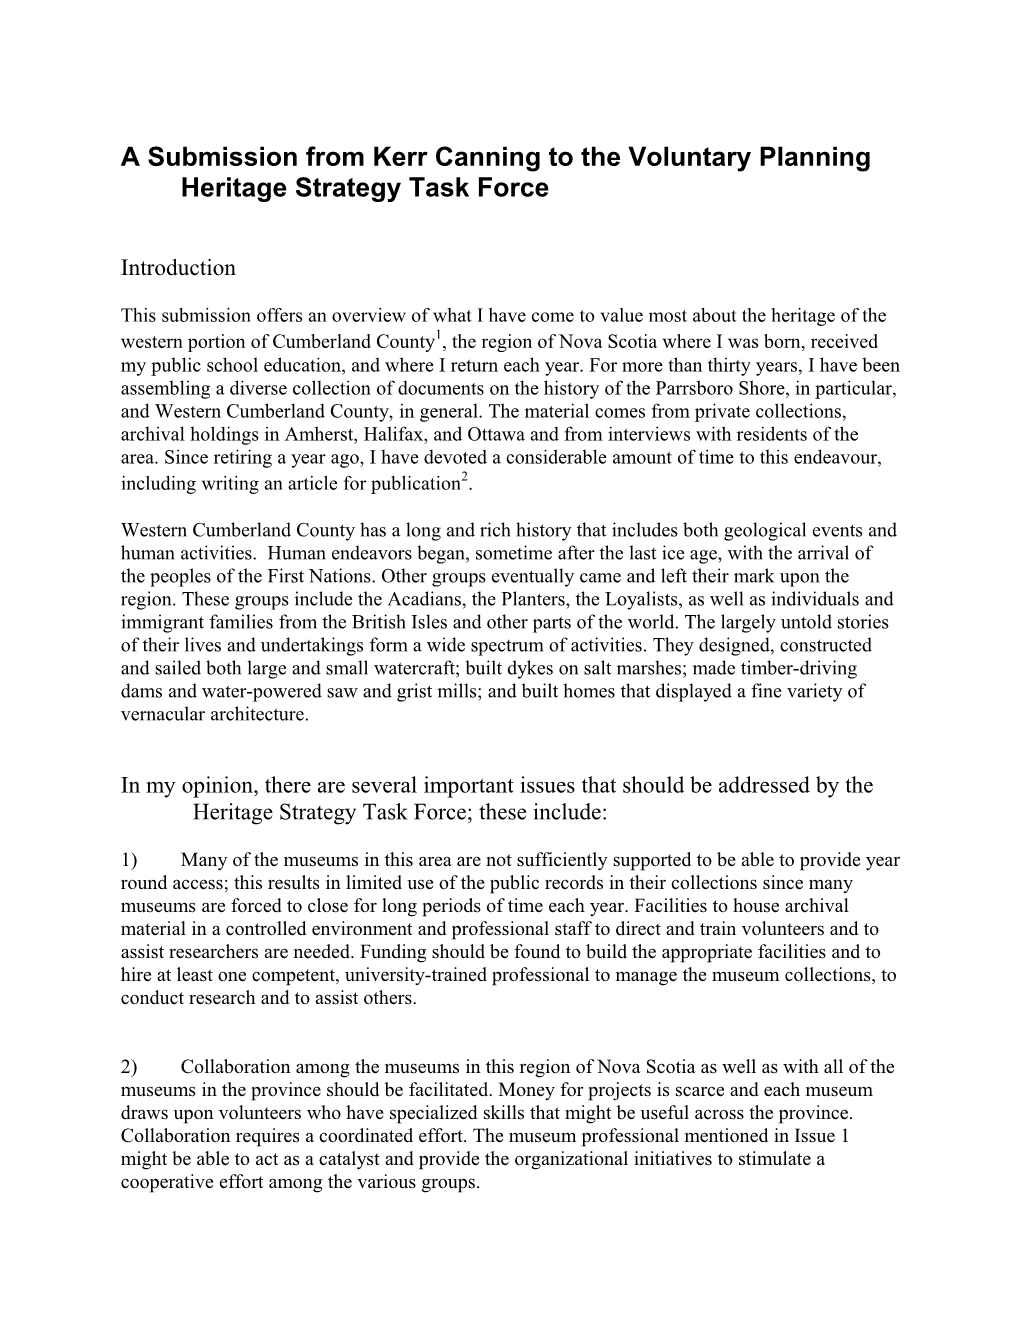 A Submission from Kerr Canning to the Voluntary Planning Heritage Strategy Task Force